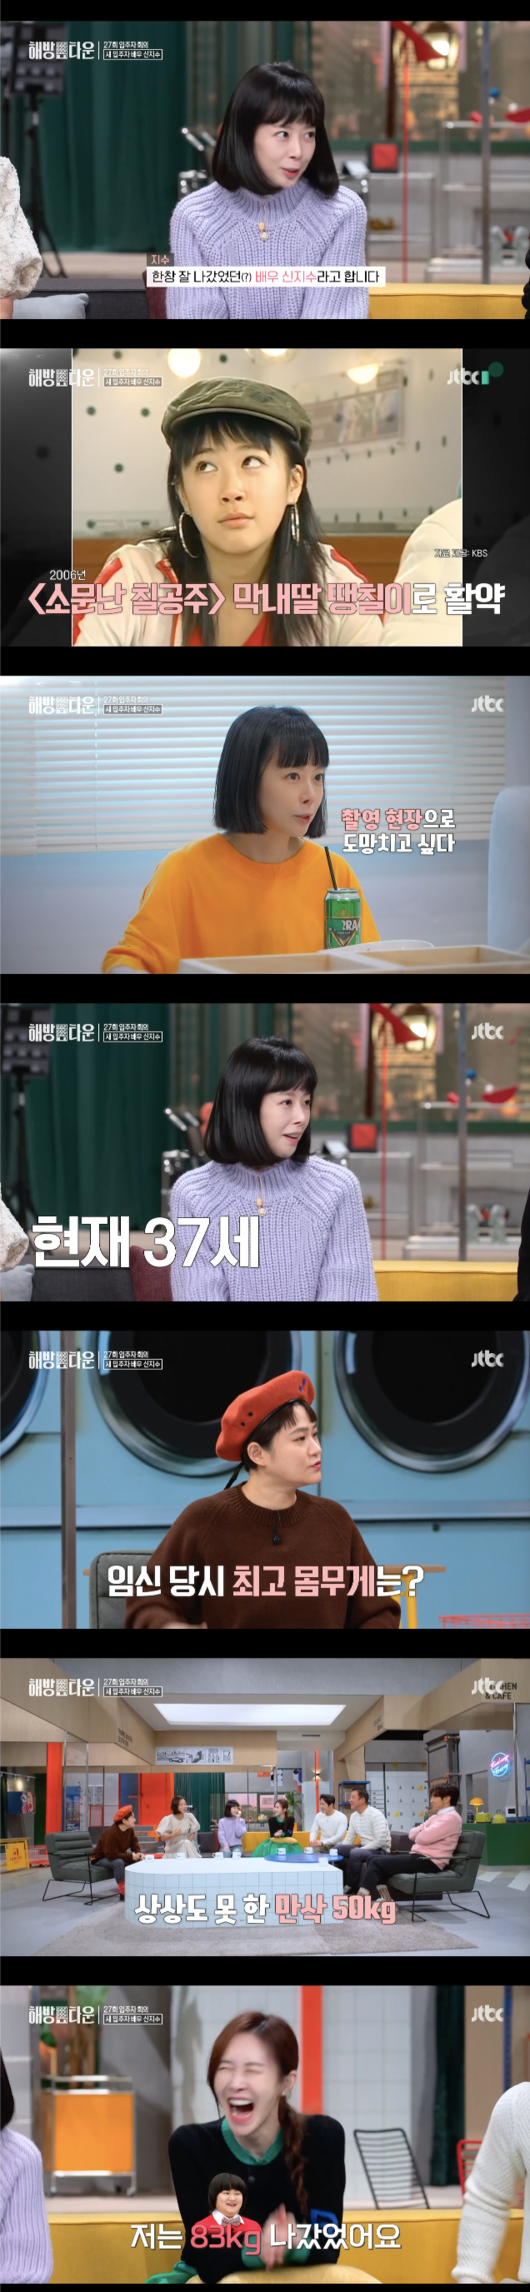 Shin Ji-soo, a feminist movement town, was surprised to reveal the maximum weight of his life.JTBCs Where I Return to Me - Feminist Movement Town (hereinafter referred to as Feminist Movement Town), which aired at 10:30 pm on the 3rd, was the 27th tenant meeting.Actor Shin Ji-soo appeared as a new tenant on the day. Shin Ji-soo said, My heart is likely to explode.It has been a long time since I was in the official ceremony, and I went well. Shin Ji-soo, who made his debut in the drama Deoki in 2006, has also played a role as a smeared Seven Princess in 2006.He is raising his four-year-old daughter Bohmyi in 2017 when he marriages with music producer Lee Ha-i.He was 16 years old at the time of his appearance in Deok-i and 22 years old at the time of his appearance in The Rumorous Seven Princess. He said, I am 37 years old now.When I was on Yoo Seons VCR, I saw it and it felt like a child had a baby, Jang said.Kim Shin-Young asked, How much weight was the highest at the time of pregnancy? Shin Ji-soo was surprised to say, It was about 50kg at the time of fullness.Kim Shin-Young said, I am up to 83kg, and Yoon Hye-jin said, Our temperature is less than our current temperature.Shin Ji-soo explained, I am short.Kim Shin-Young asked, When I went to the Feminist movement town, I said I accepted it in less than a second. Shin Ji-soo said, It was actually just before crazy.It was just before Burnout. He was the first outing in four years. Shin Ji-soo said, It was all I went to waste 40 months after going out at night.No one else could care. When my husband held me, the child cried. It was my gum. Lee Jong-hyuk joked, Then give birth to the second child and get revenge: dragging the stroller and burning milk.Shin Ji-soos feminist movement life was revealed. Shin Ji-soo was embarrassed to see his VCR self and say, Why do you look so thin?I had no time to raise a child, and I got pregnant as soon as I got married in 2017 and got a daughter in 2018, he said of the reason for the lack of smoke.I was so inflexible when I first raised my child, I was sober, he added. Its a dirty story, but I took a shower once every five days.JTBC Where I Return to Me - Feminist Movement Town broadcast screen capture